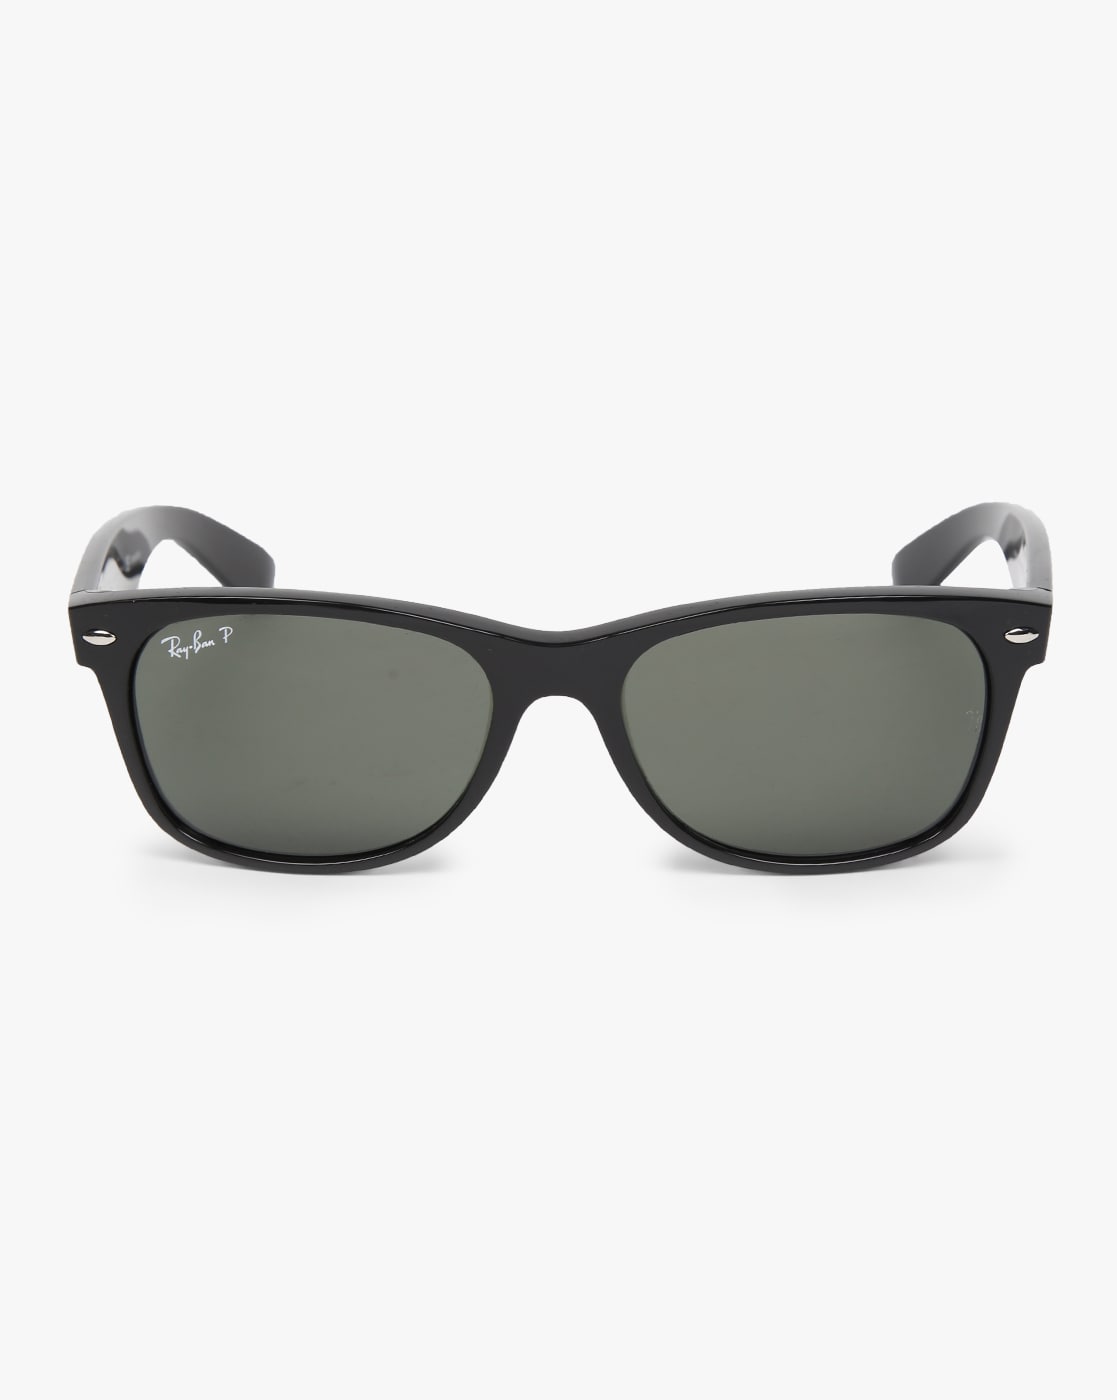 Ray-Ban RB4252 - Corporate Gifting | BrandSTIK